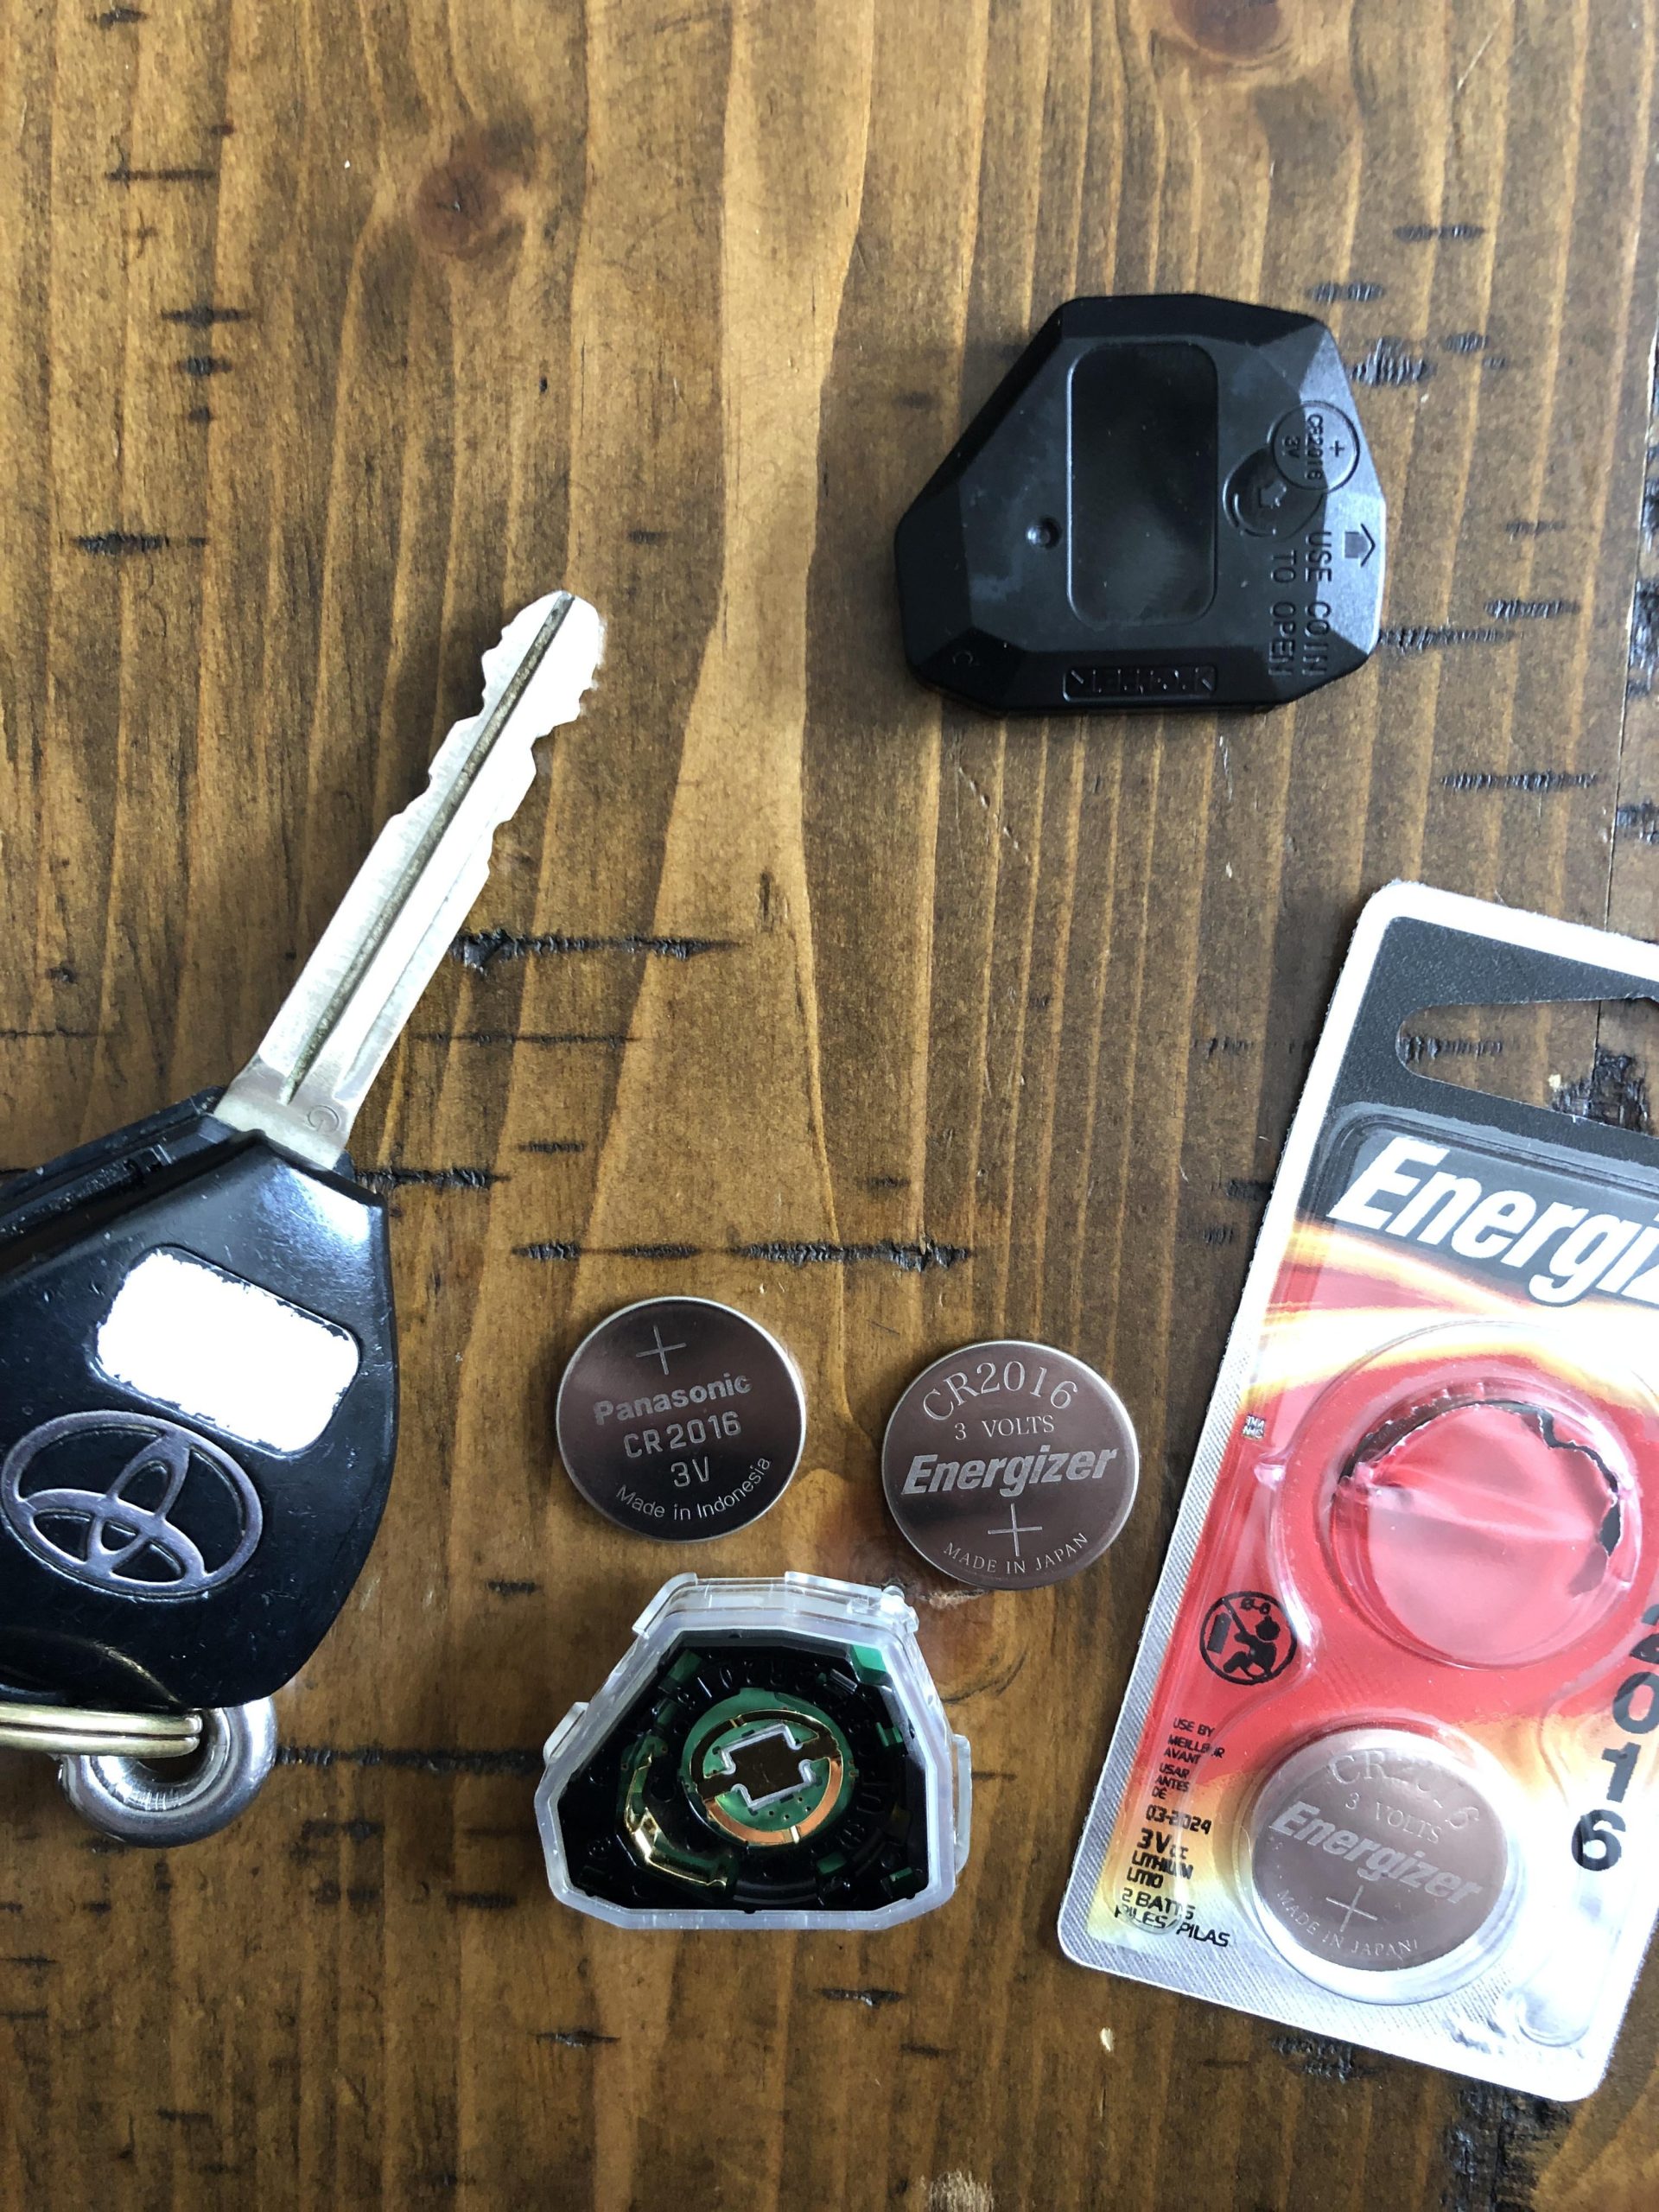 Toyota Key Fob Not Working After Battery Change